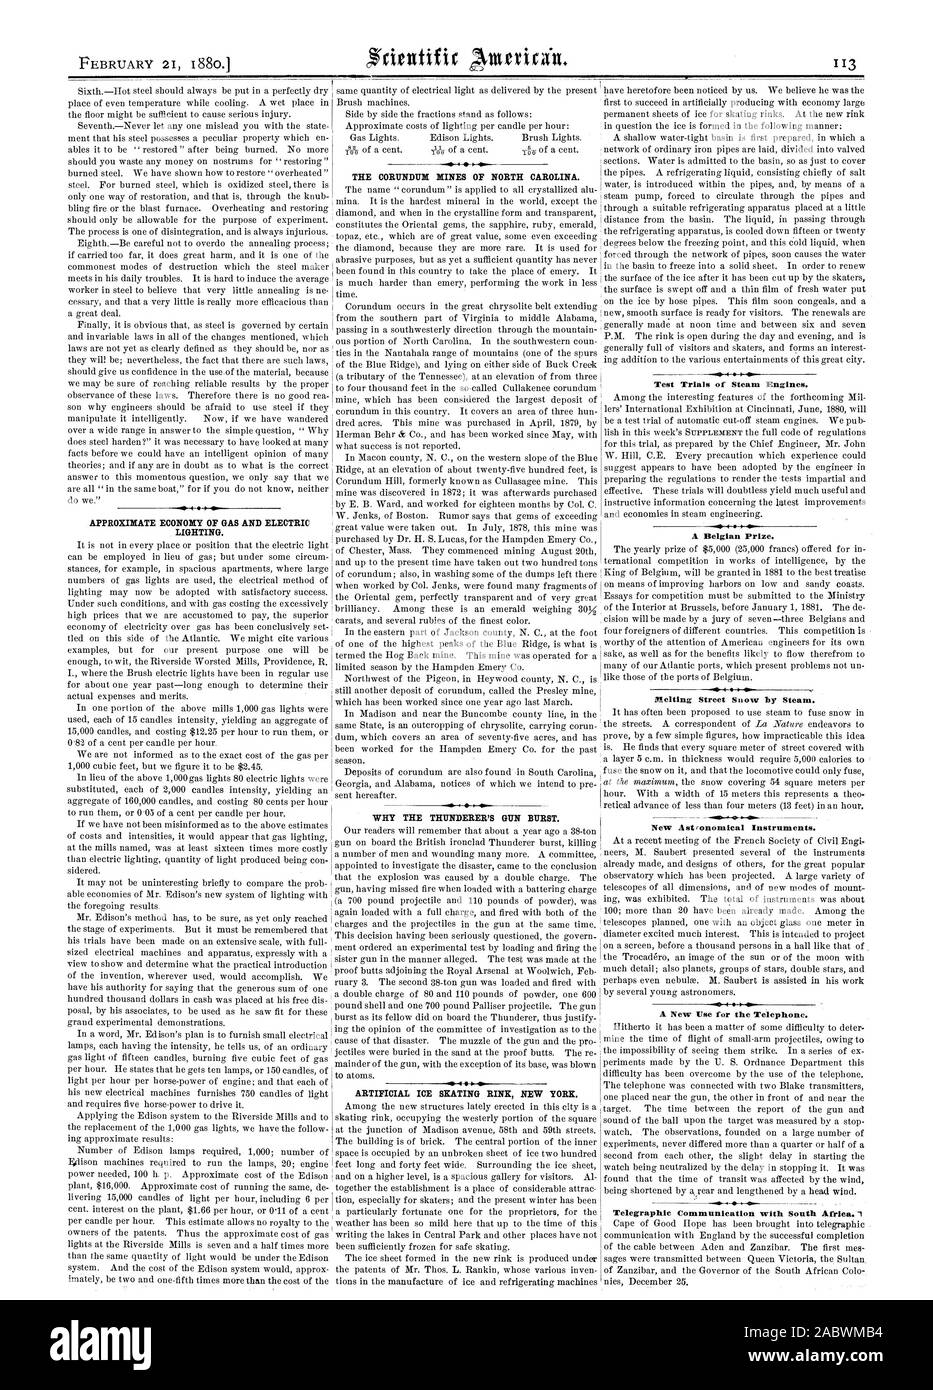 3 APPROXIMATE ECONOMY OF GAS AND ELECTRIC LIGHTING. THE CORUNDUM MINES OF NORTH CAROLINA. WHY THE THUNDERER'S GUN BURST. ARTIFICIAL ICE SKATING RINK NEW YORK. Test Trials of Steam Engines. A Belgian Prize. Melting Street Snow by Steam. New Astronomical Instruments. A New Use for the Telephone., scientific american, 1880-02-21 Stock Photo